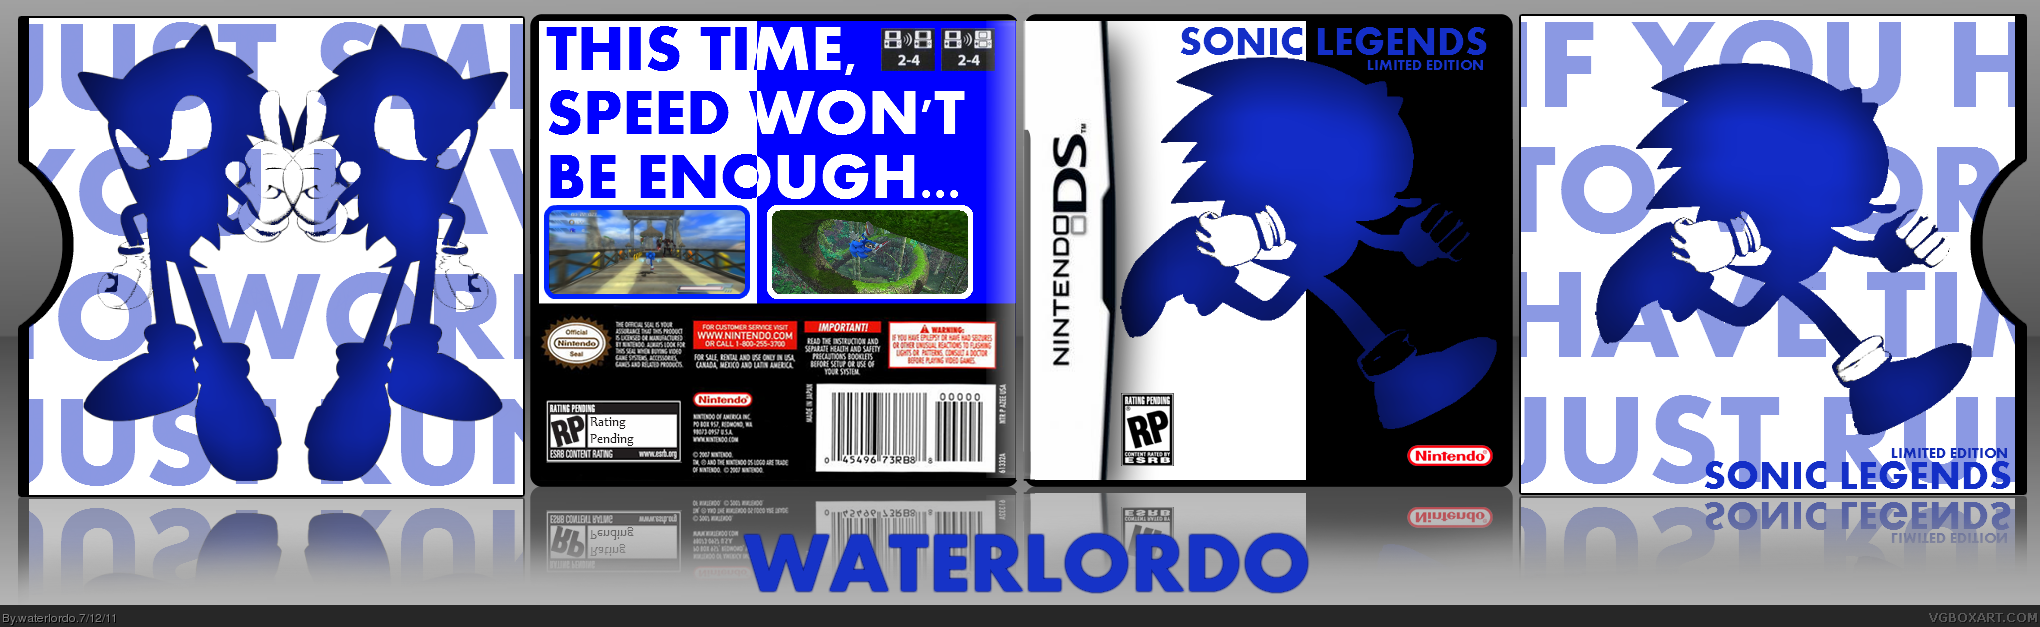 Sonic Legends: Limited Edition box cover